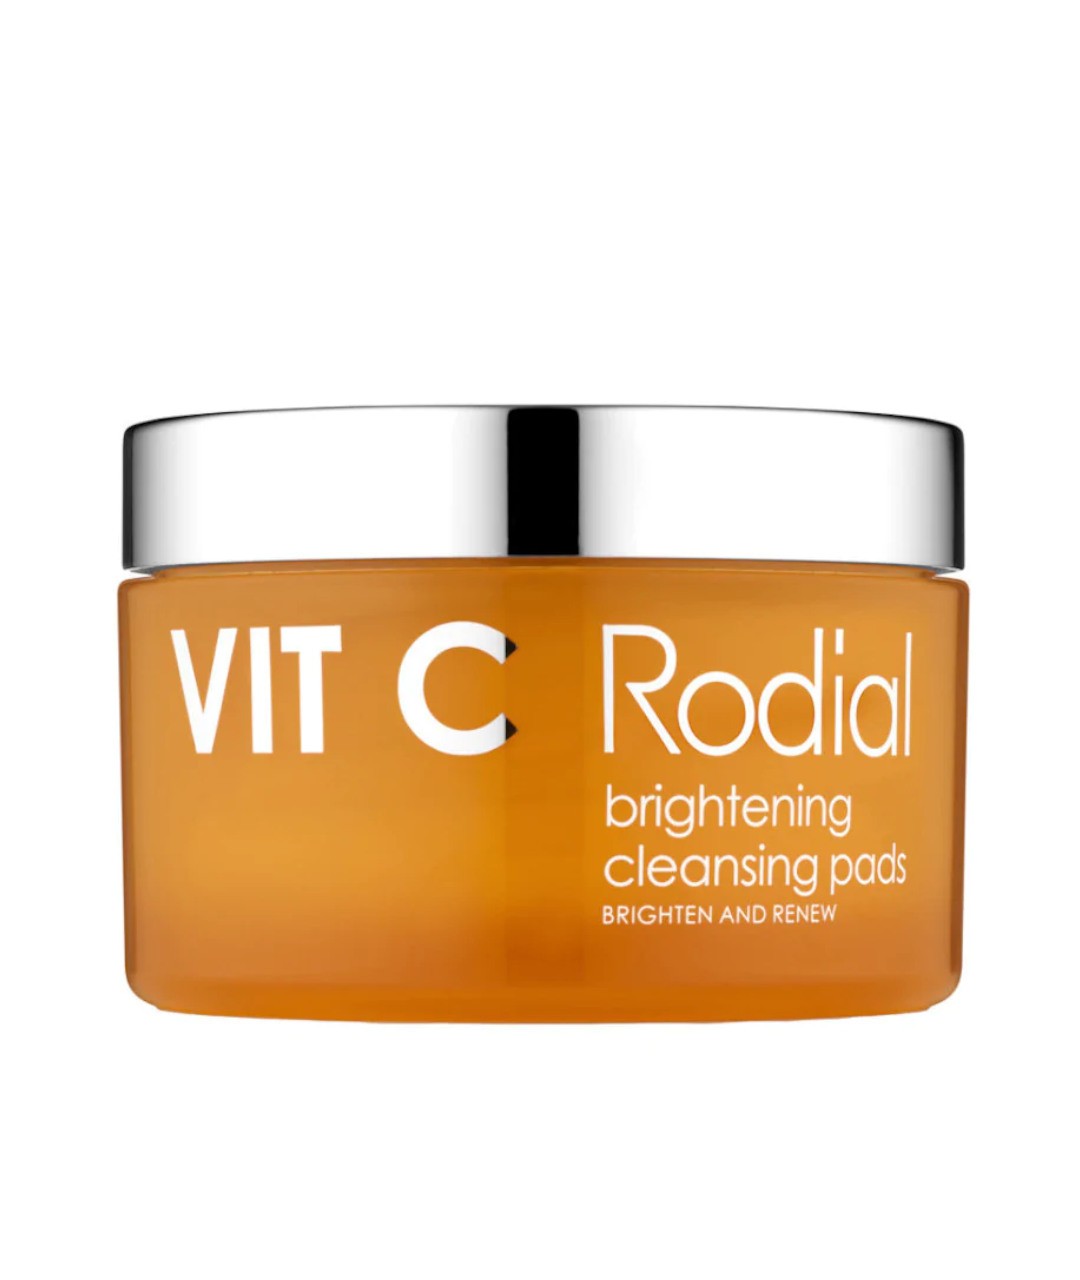 Vit C brightening and cleansing face pads